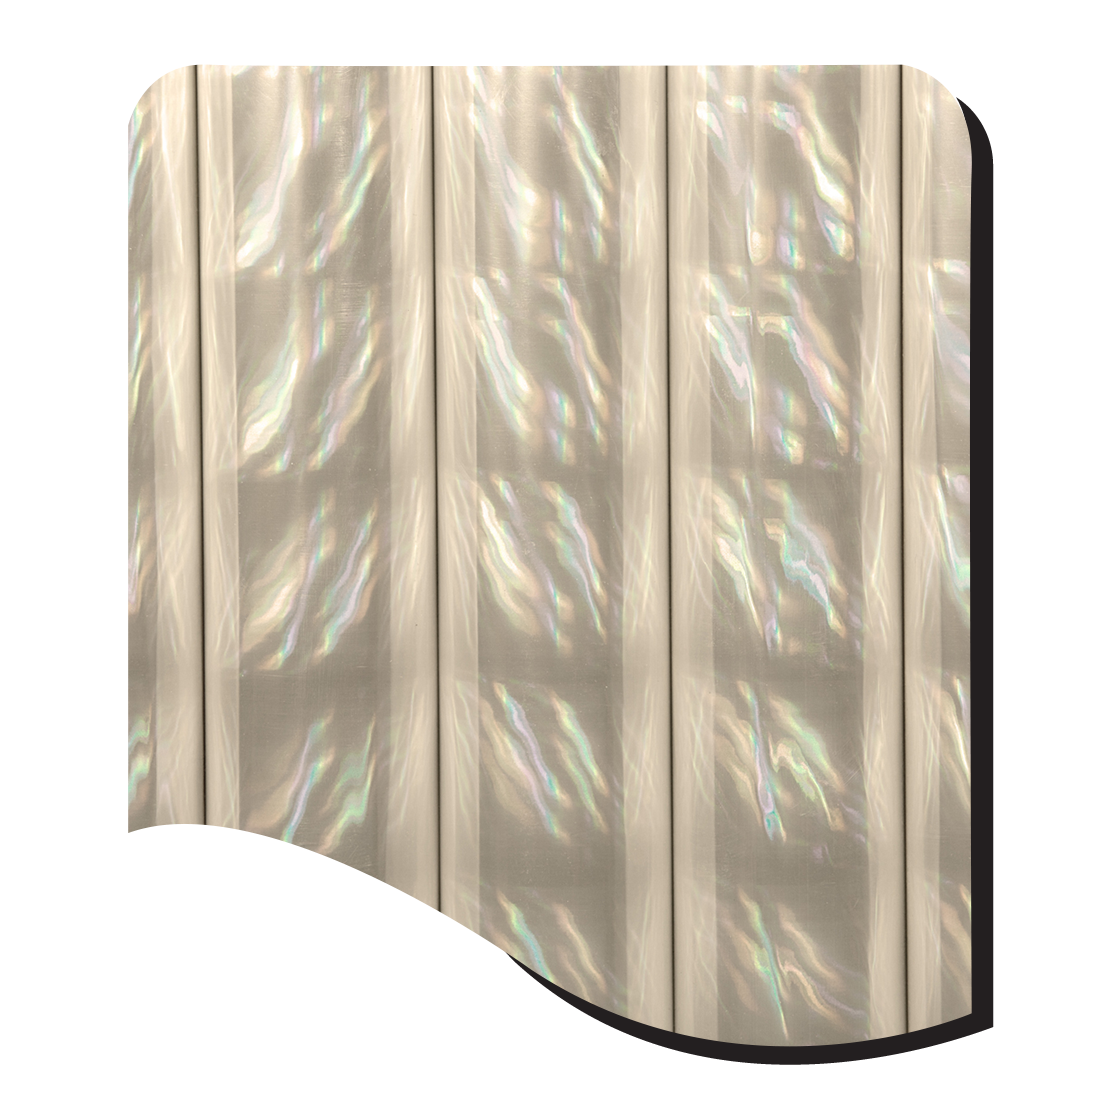 4101-CLEAR HOLOGRAPHIC PILLARS OF LIGHT